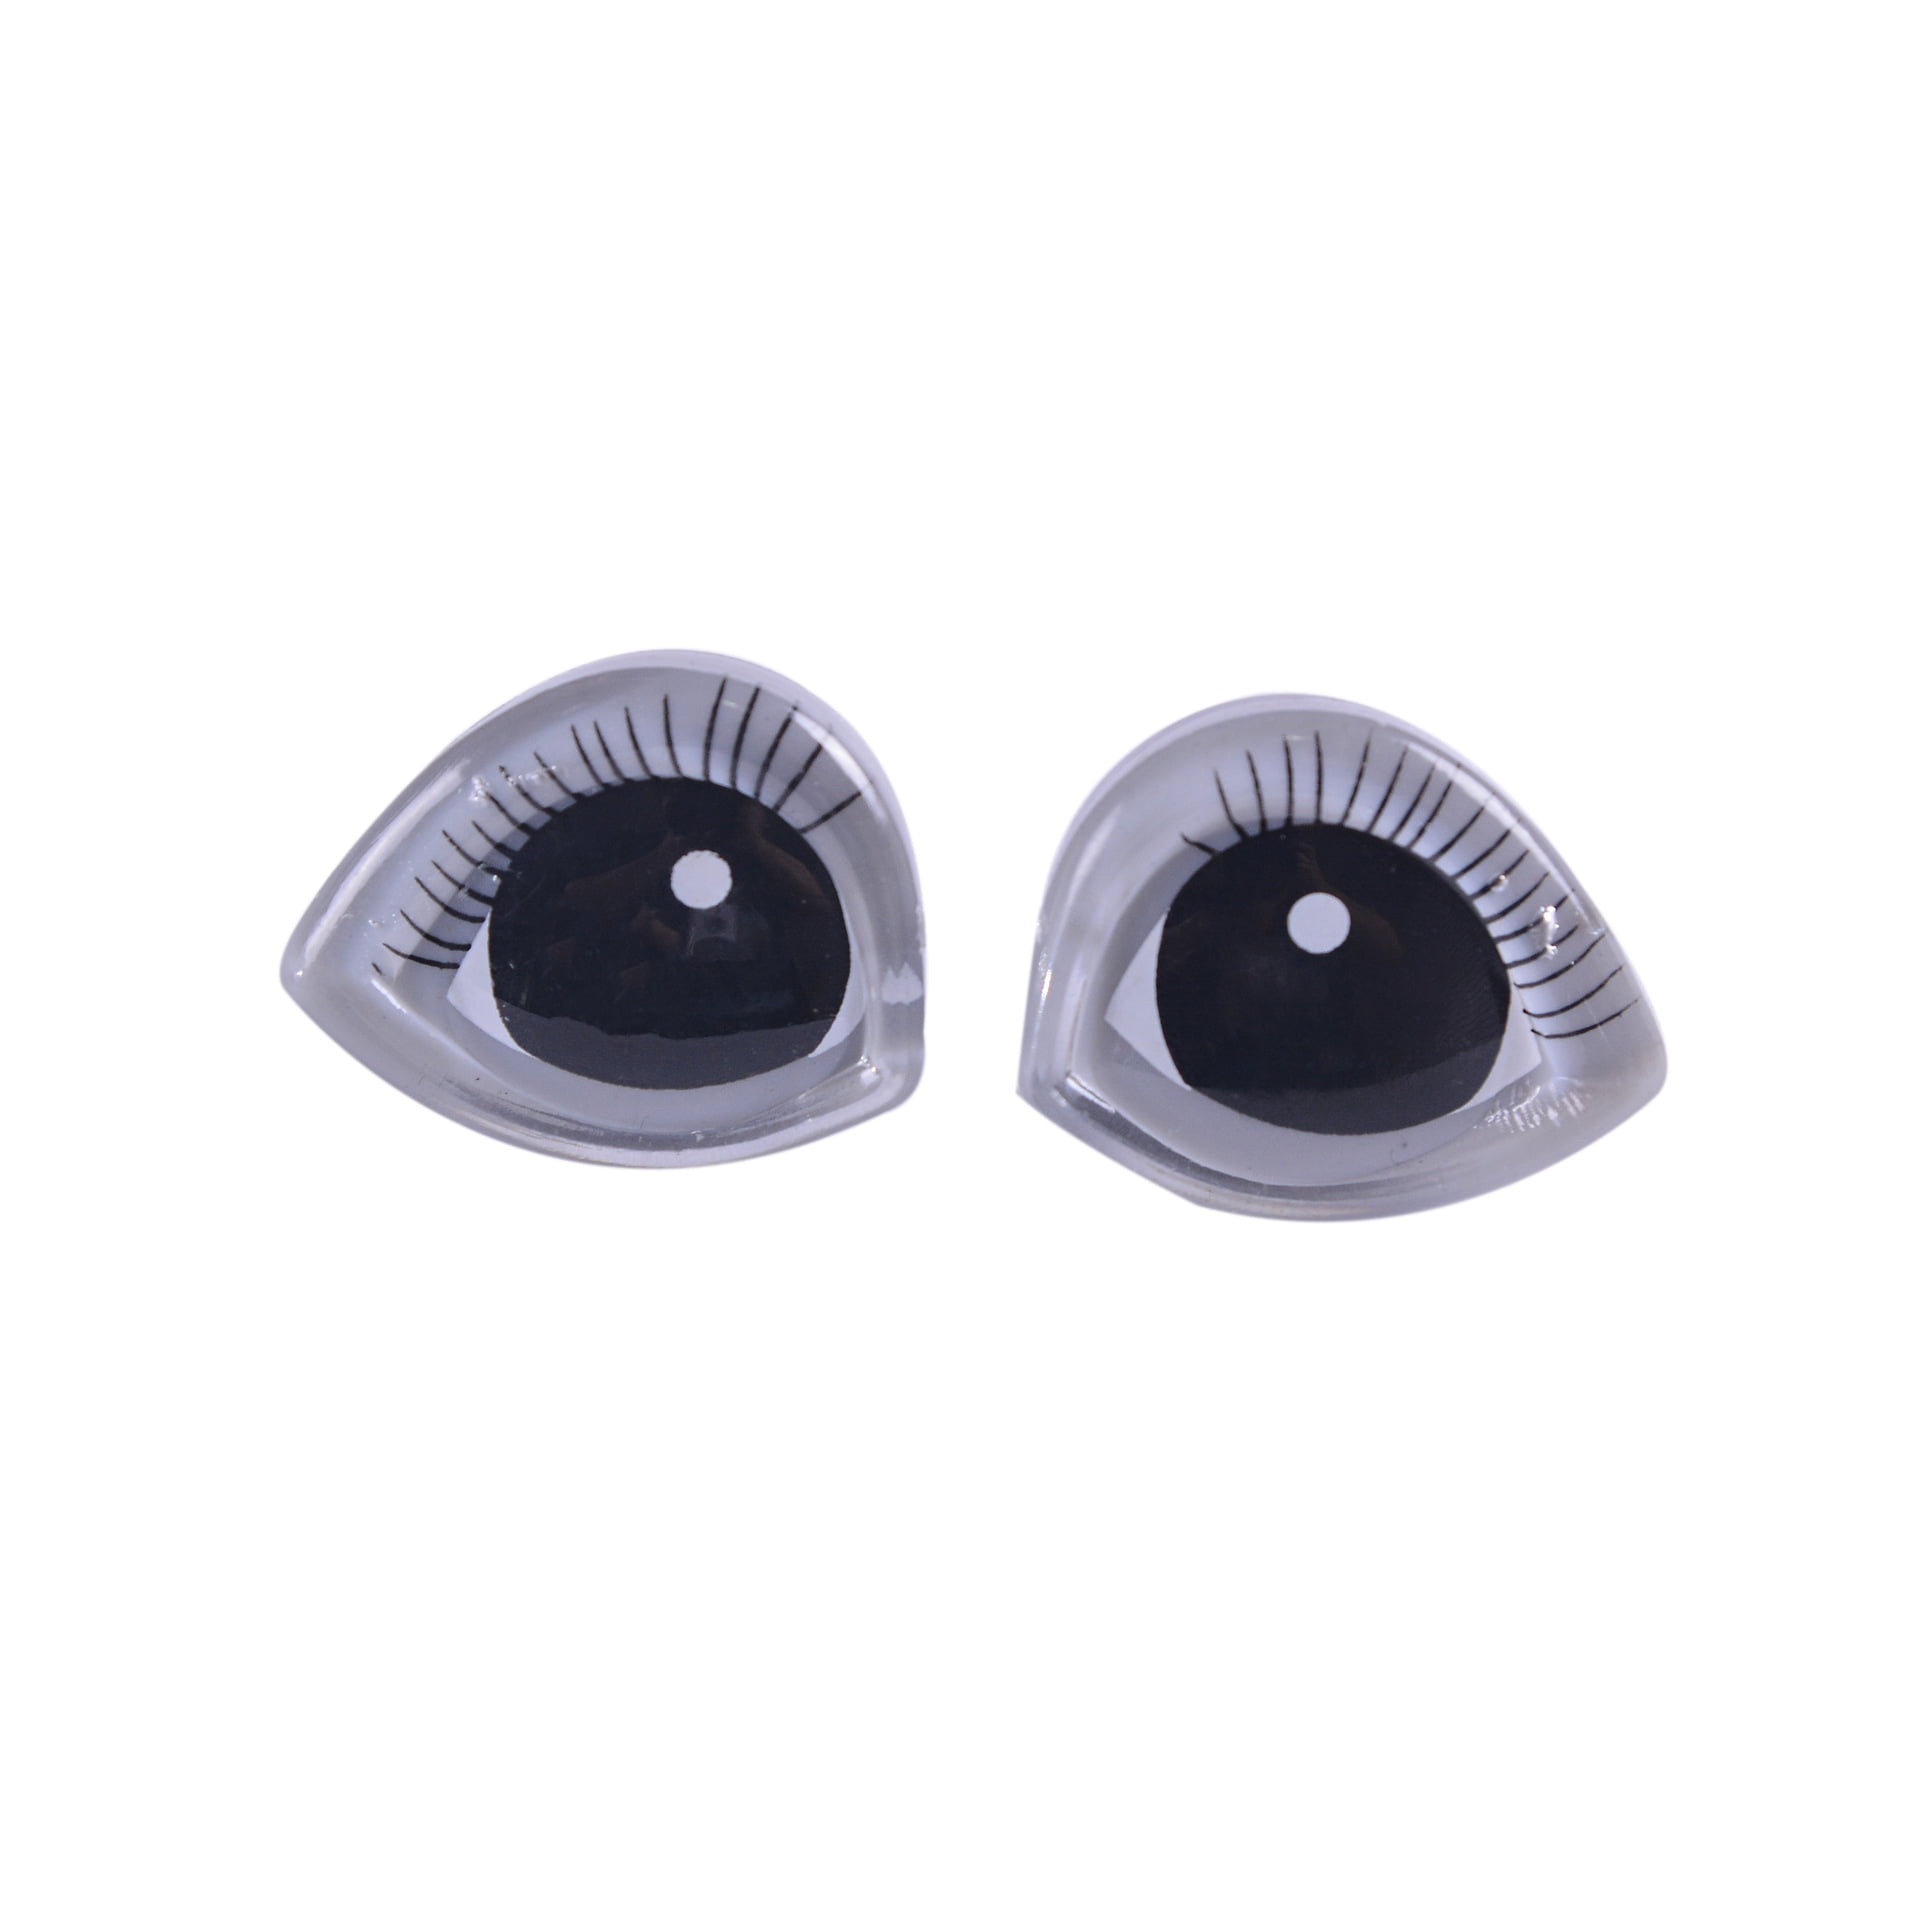 Genie Crafts Googly Eyes 500-Pack Adhesive Wiggle Eyes with Case, Moving  Eyes, Art Craft Supplies, for DIY, School Projects, Toy Accessory, and  Scrapbooking, Doll Making, Decoration, 3 Designs, 7 Sizes 